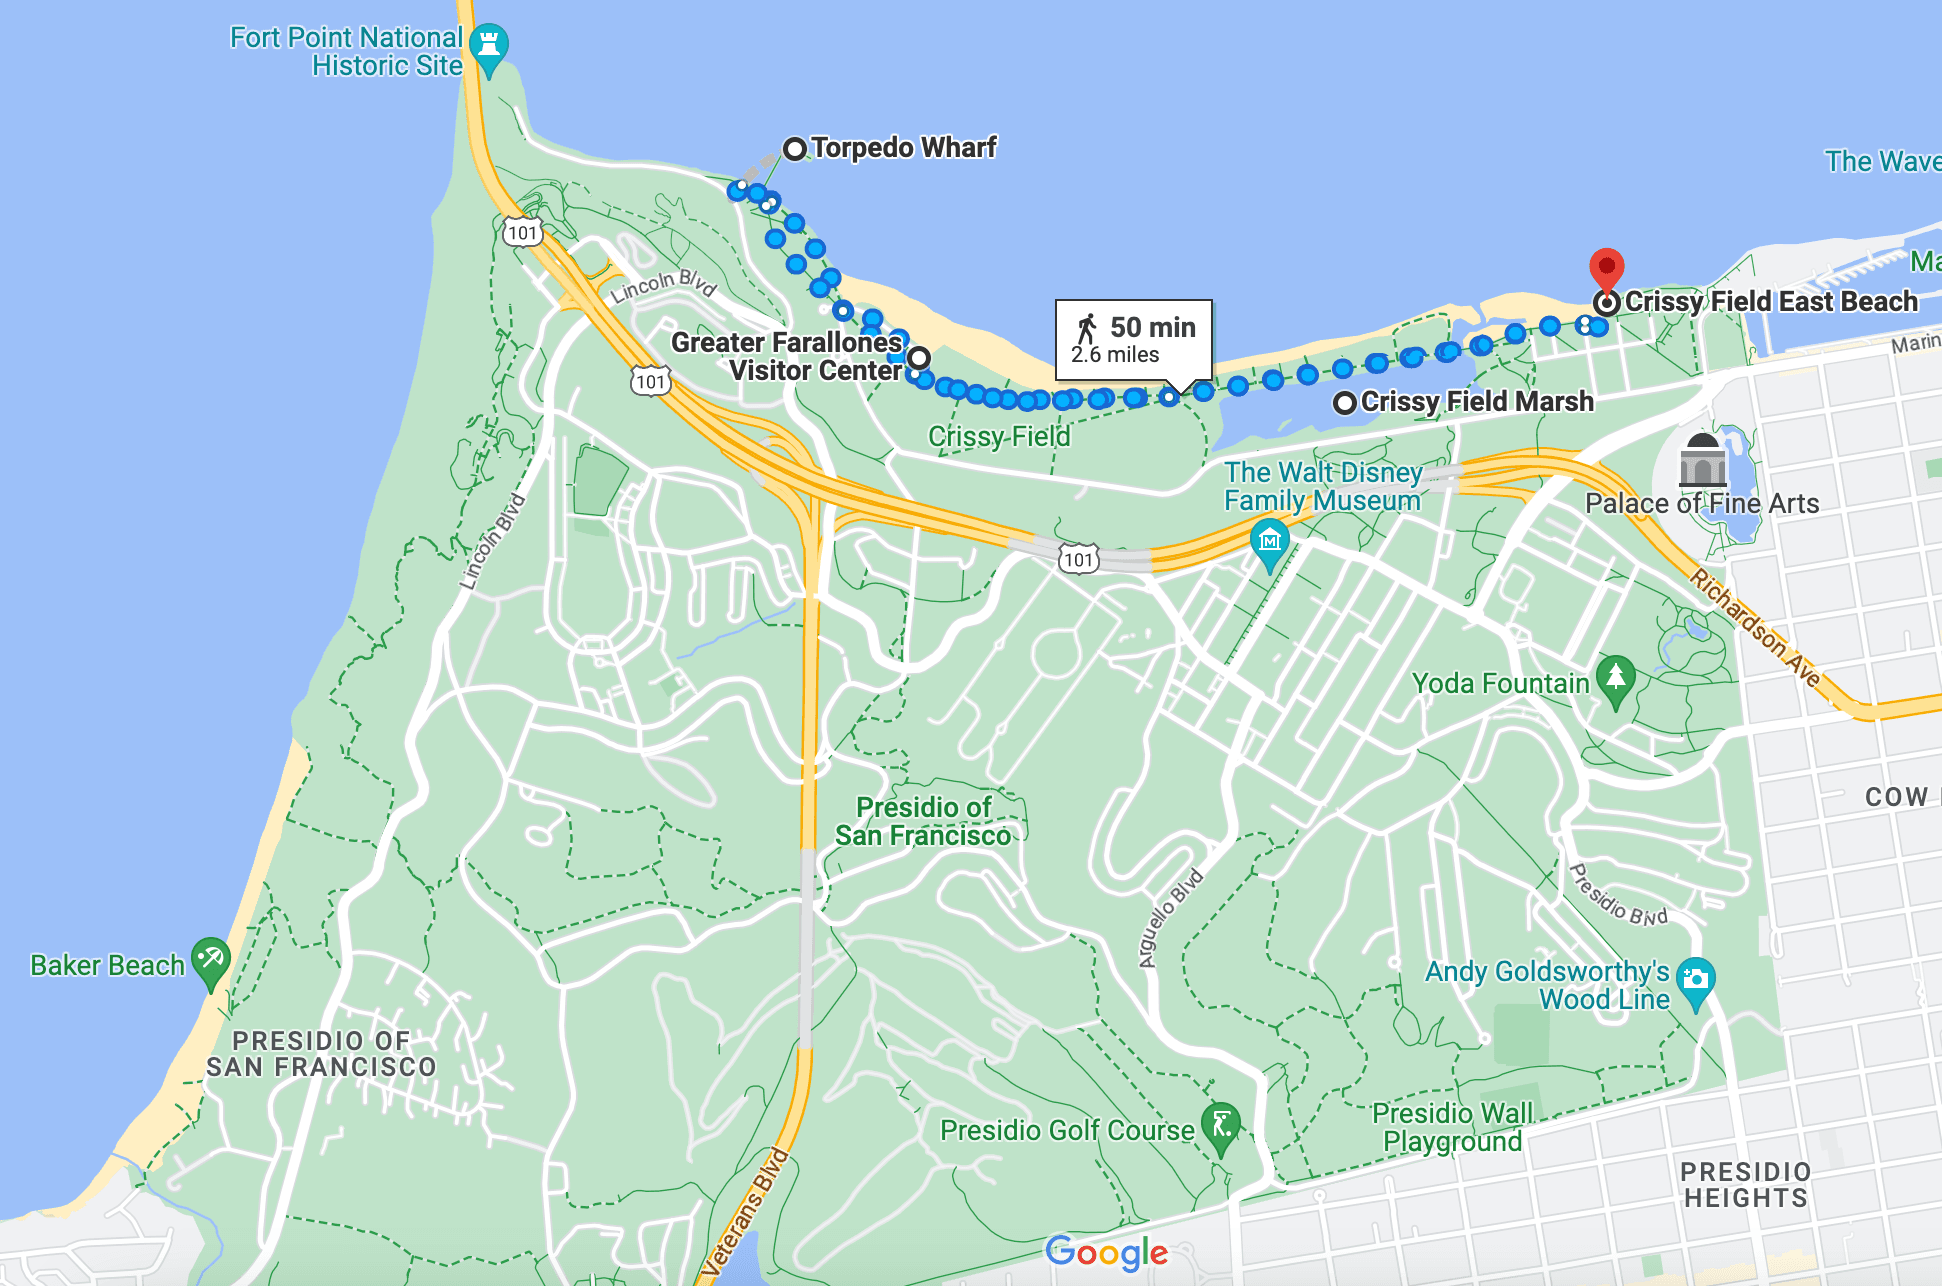 Overview of Crissy Field East Beach itinerary at the Presidio of San Francisco.